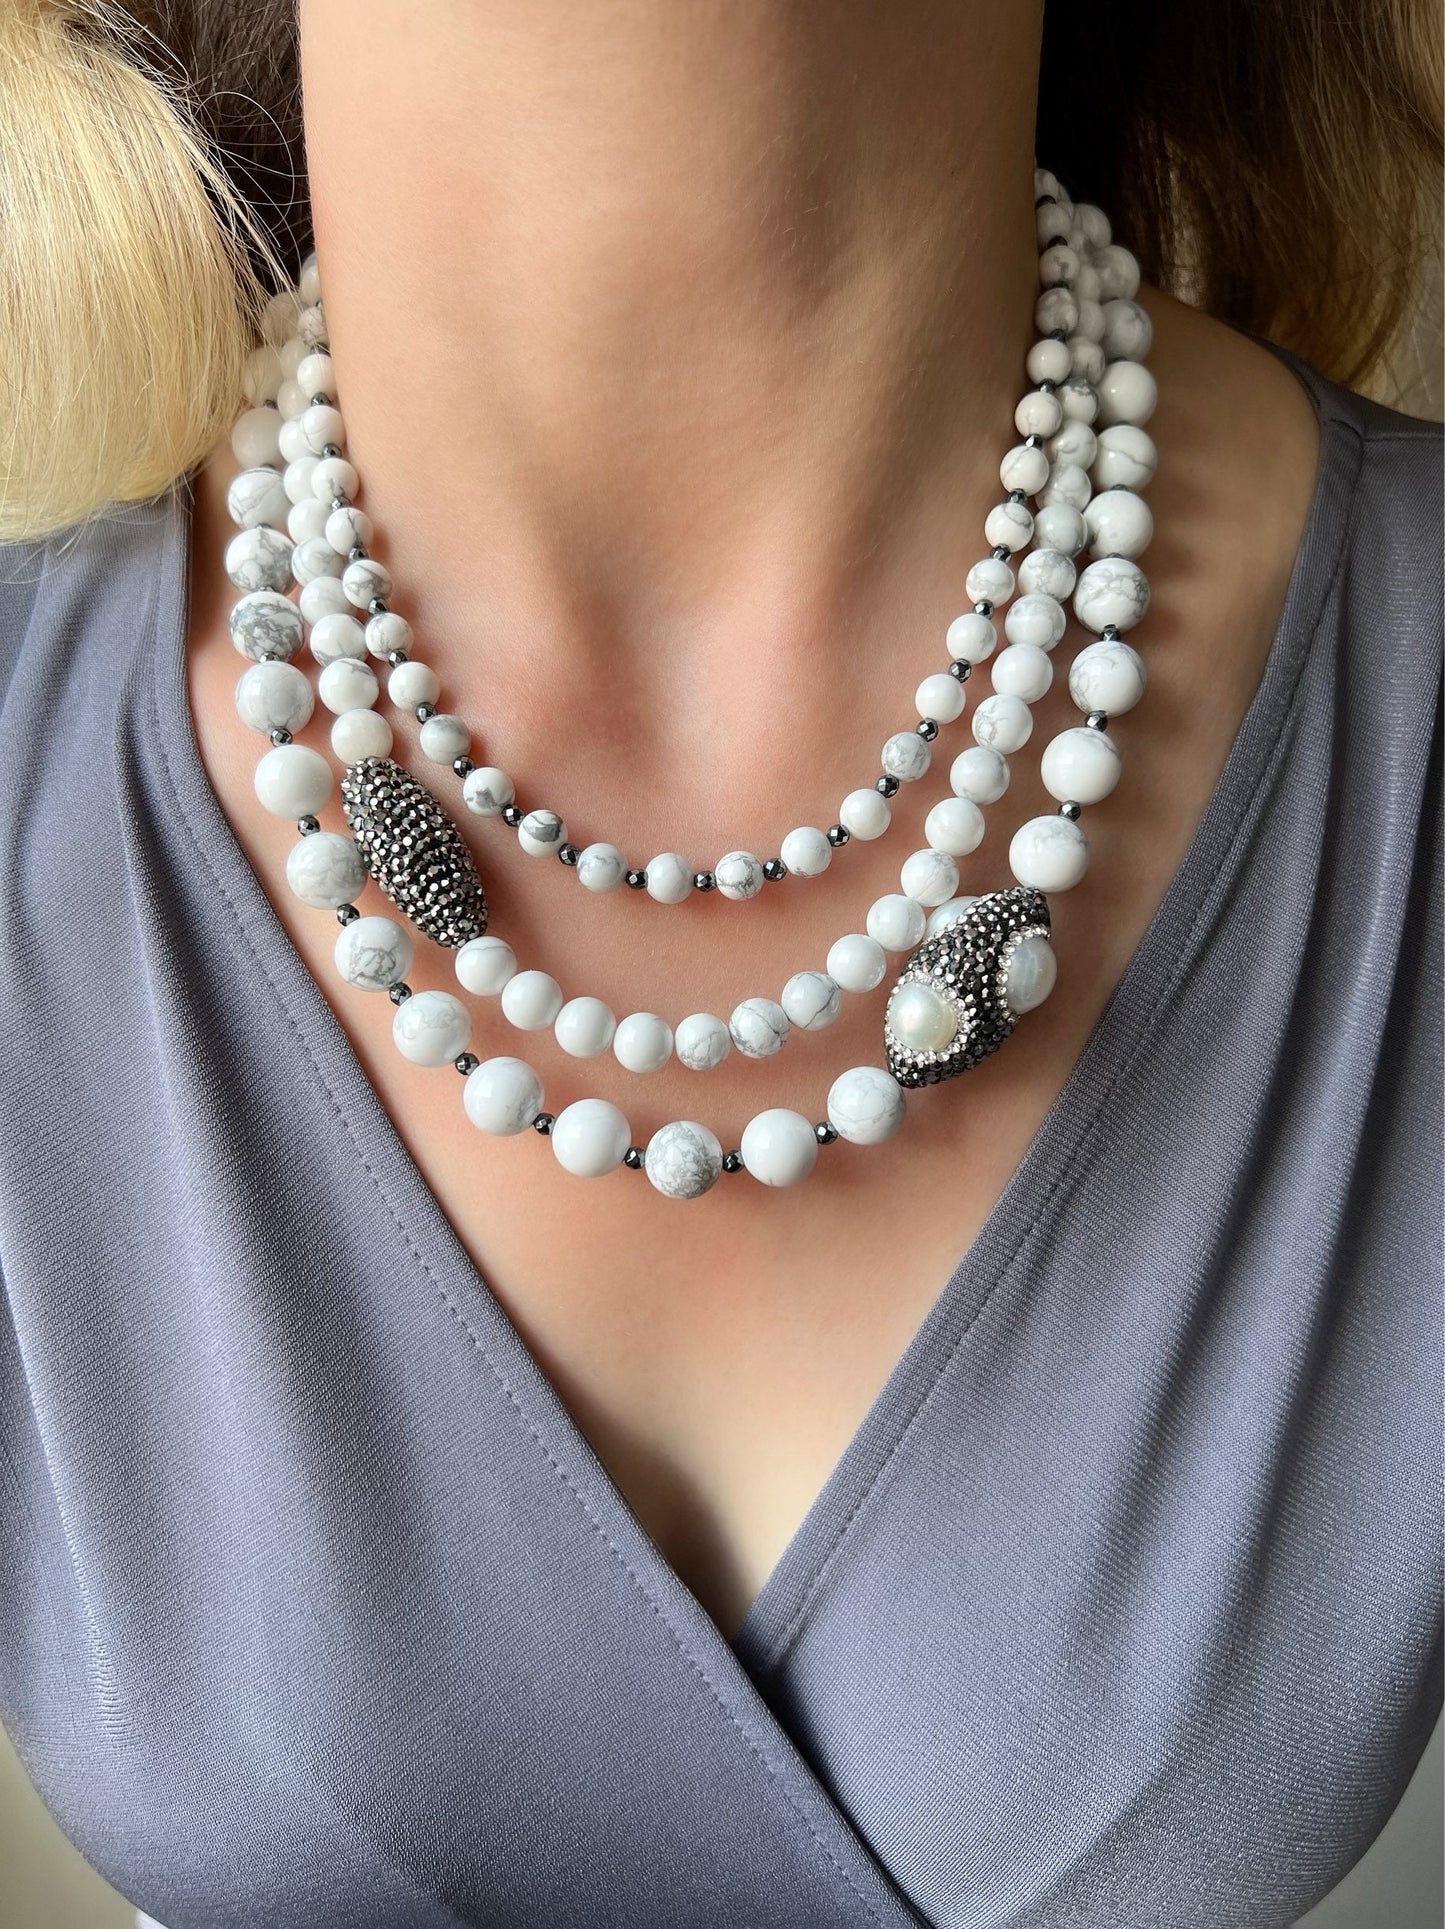 three rows howlite stone necklace is for women.It has handmade pieces on rows.